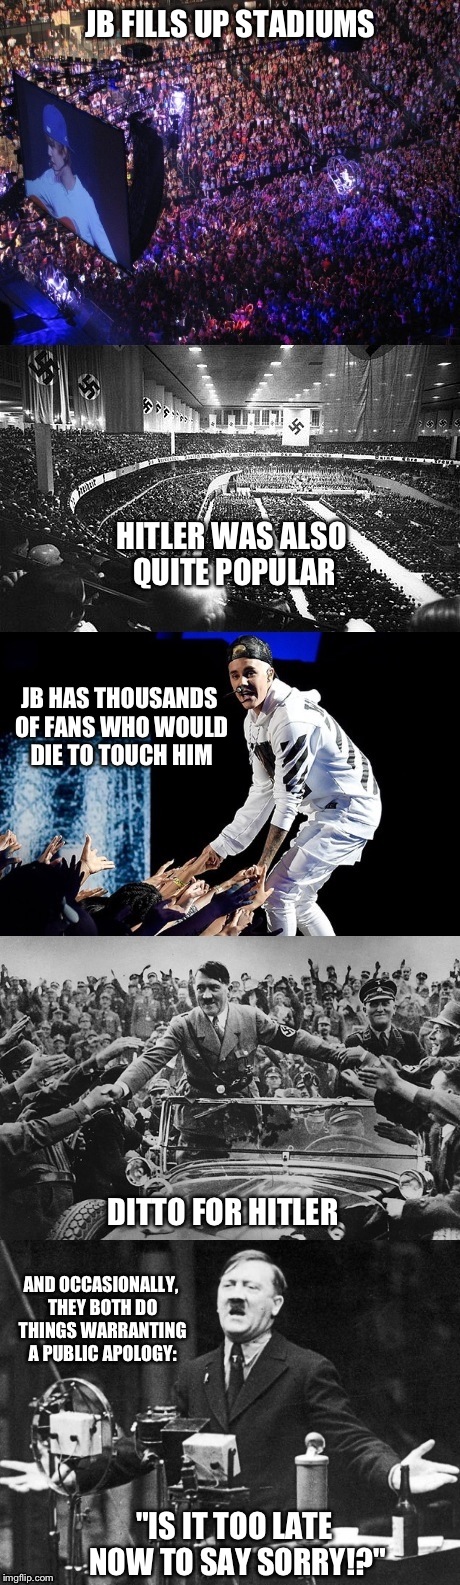 Justin Bieber and Hitler are both exactly alike! Get the facts with this meme.. | JB FILLS UP STADIUMS; HITLER WAS ALSO QUITE POPULAR; JB HAS THOUSANDS OF FANS WHO WOULD DIE TO TOUCH HIM; DITTO FOR HITLER; AND OCCASIONALLY, THEY BOTH DO THINGS WARRANTING A PUBLIC APOLOGY:; "IS IT TOO LATE NOW TO SAY SORRY!?" | image tagged in hitler,justin bieber,nazi,proud unpopular opinion,funny,memes | made w/ Imgflip meme maker